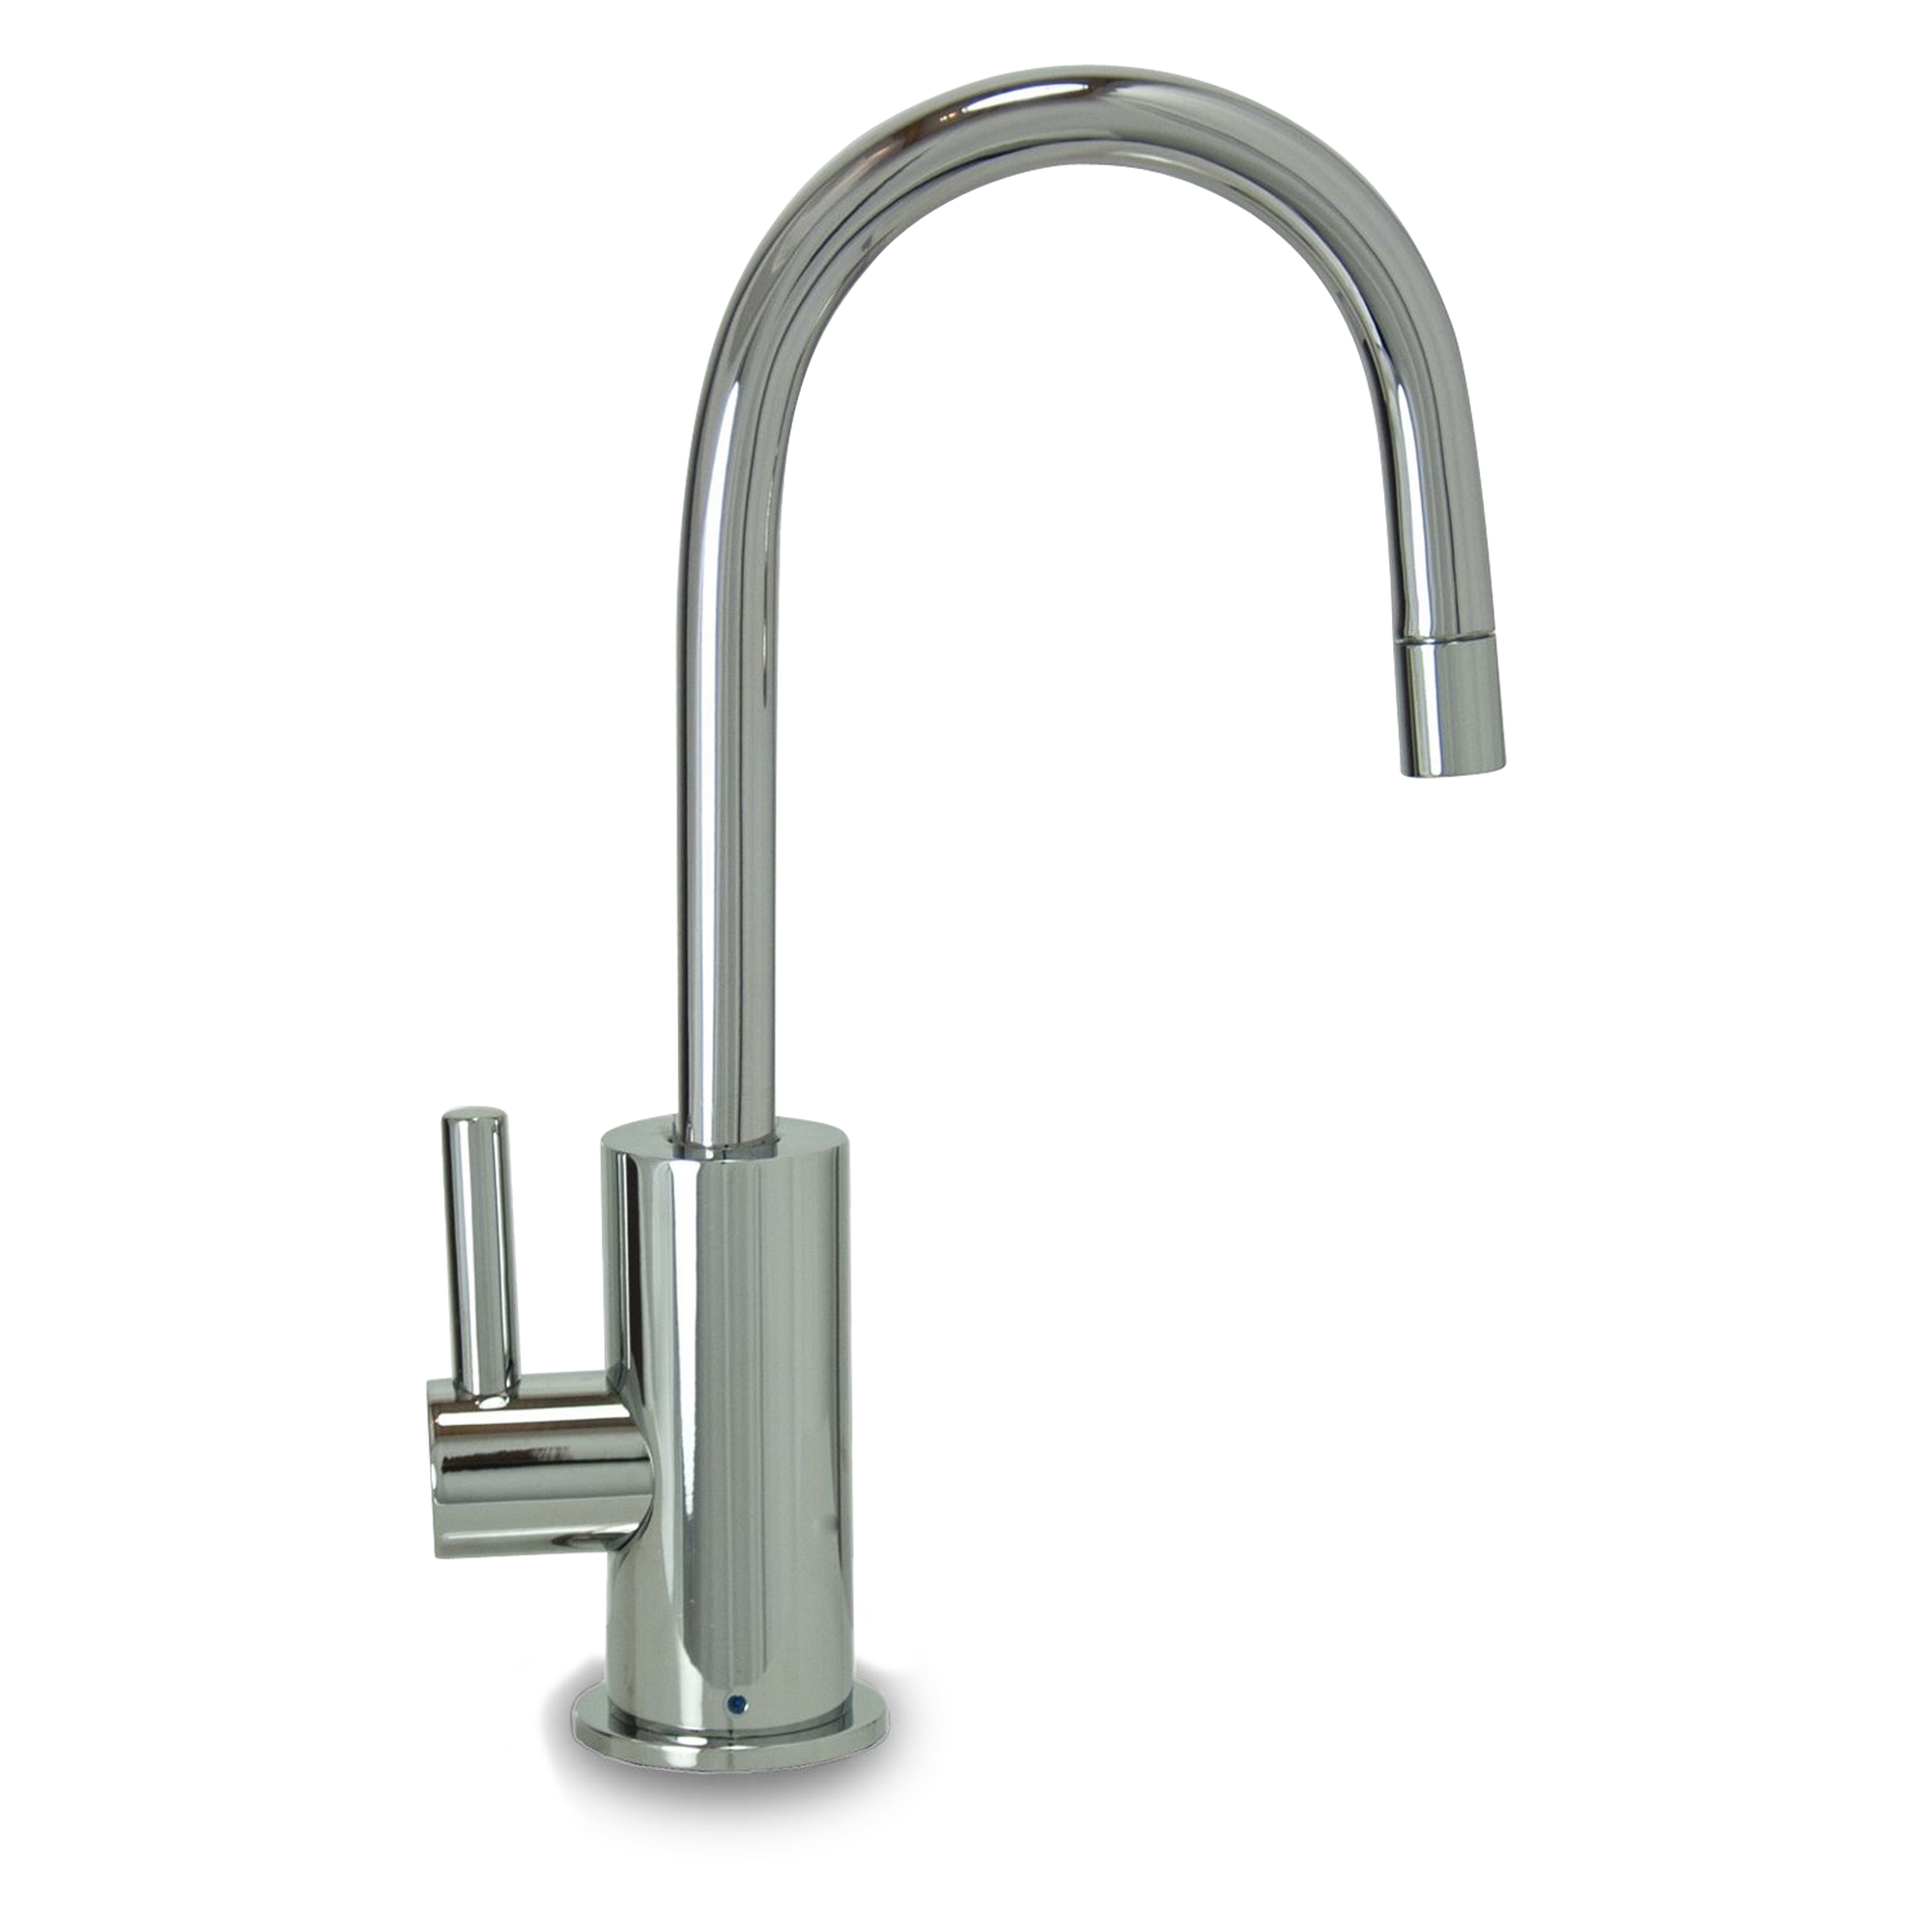 The Linea II filter tap is a seamless, modern, cold water dispenser.